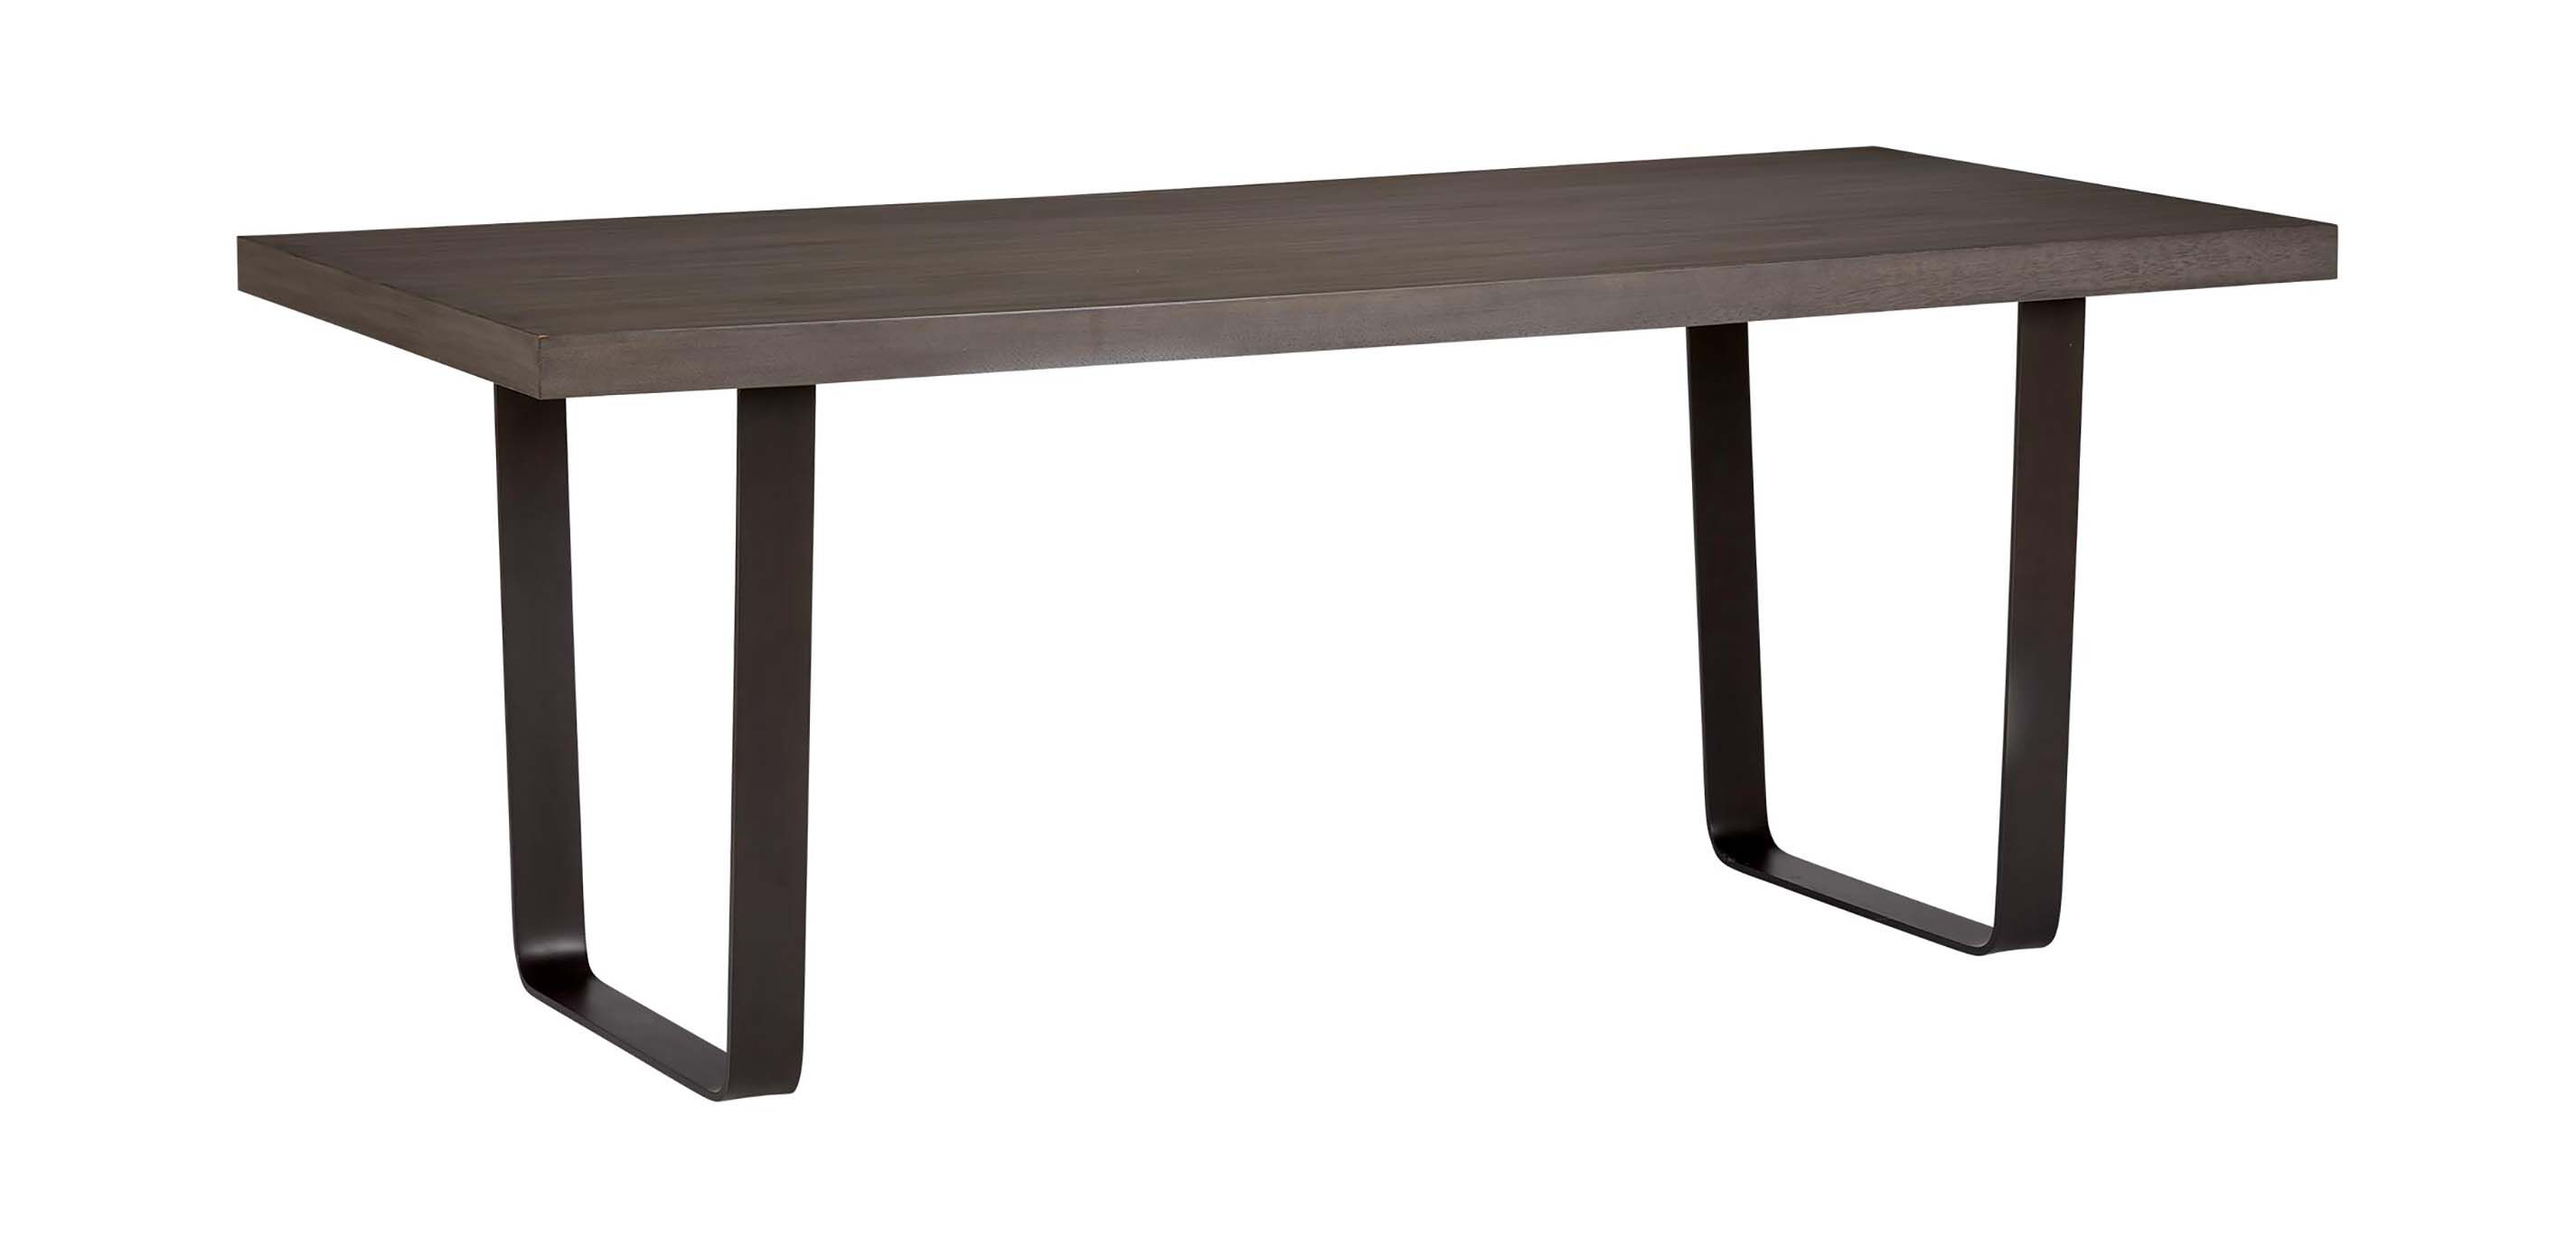 Hoyt Wood and Metal Midcentury-Modern Dining Table | Ethan Allen